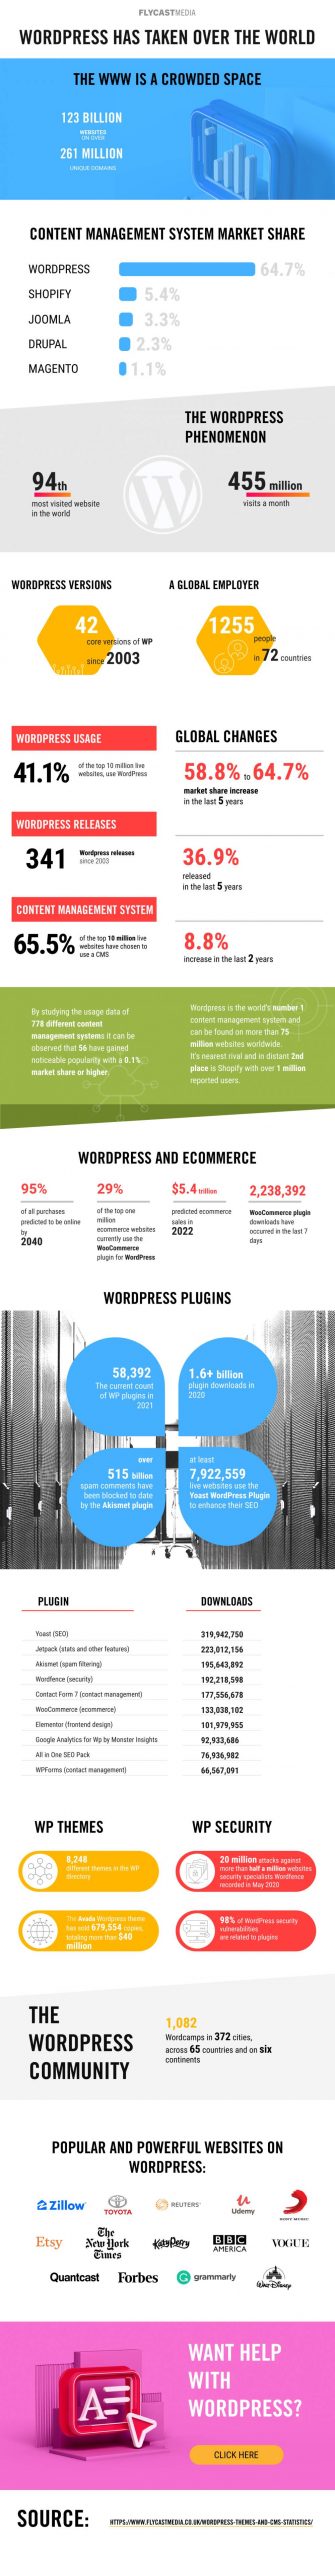 Wordpress The Most Popular CMS In The World